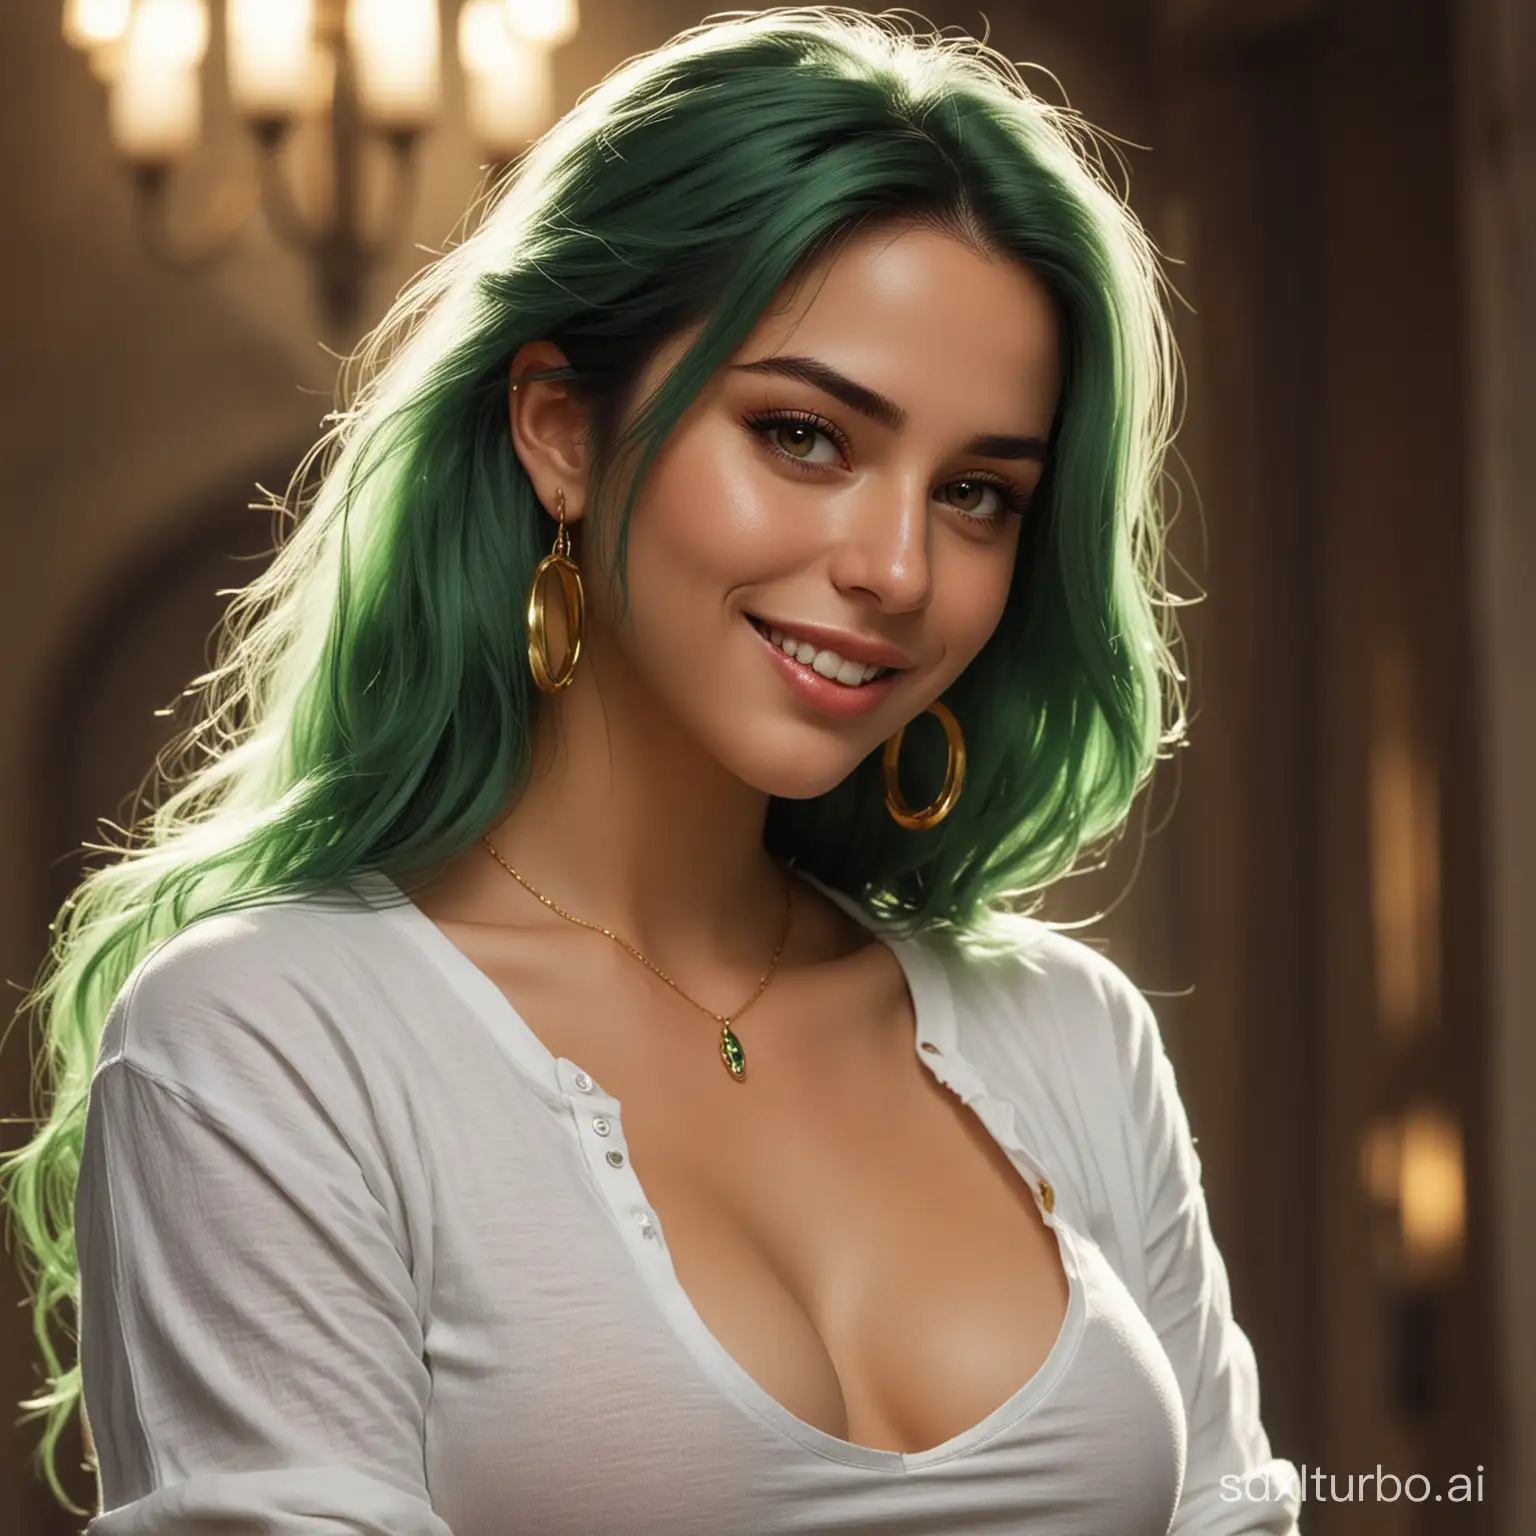 A sexy and cold female assassin，oval face，A plump chest，A sinister and charming smile，Wearing golden earrings on the ears，Green Spot Dyed 37% Medium Long Hair，White tight fitting exposed navel t-shirt，